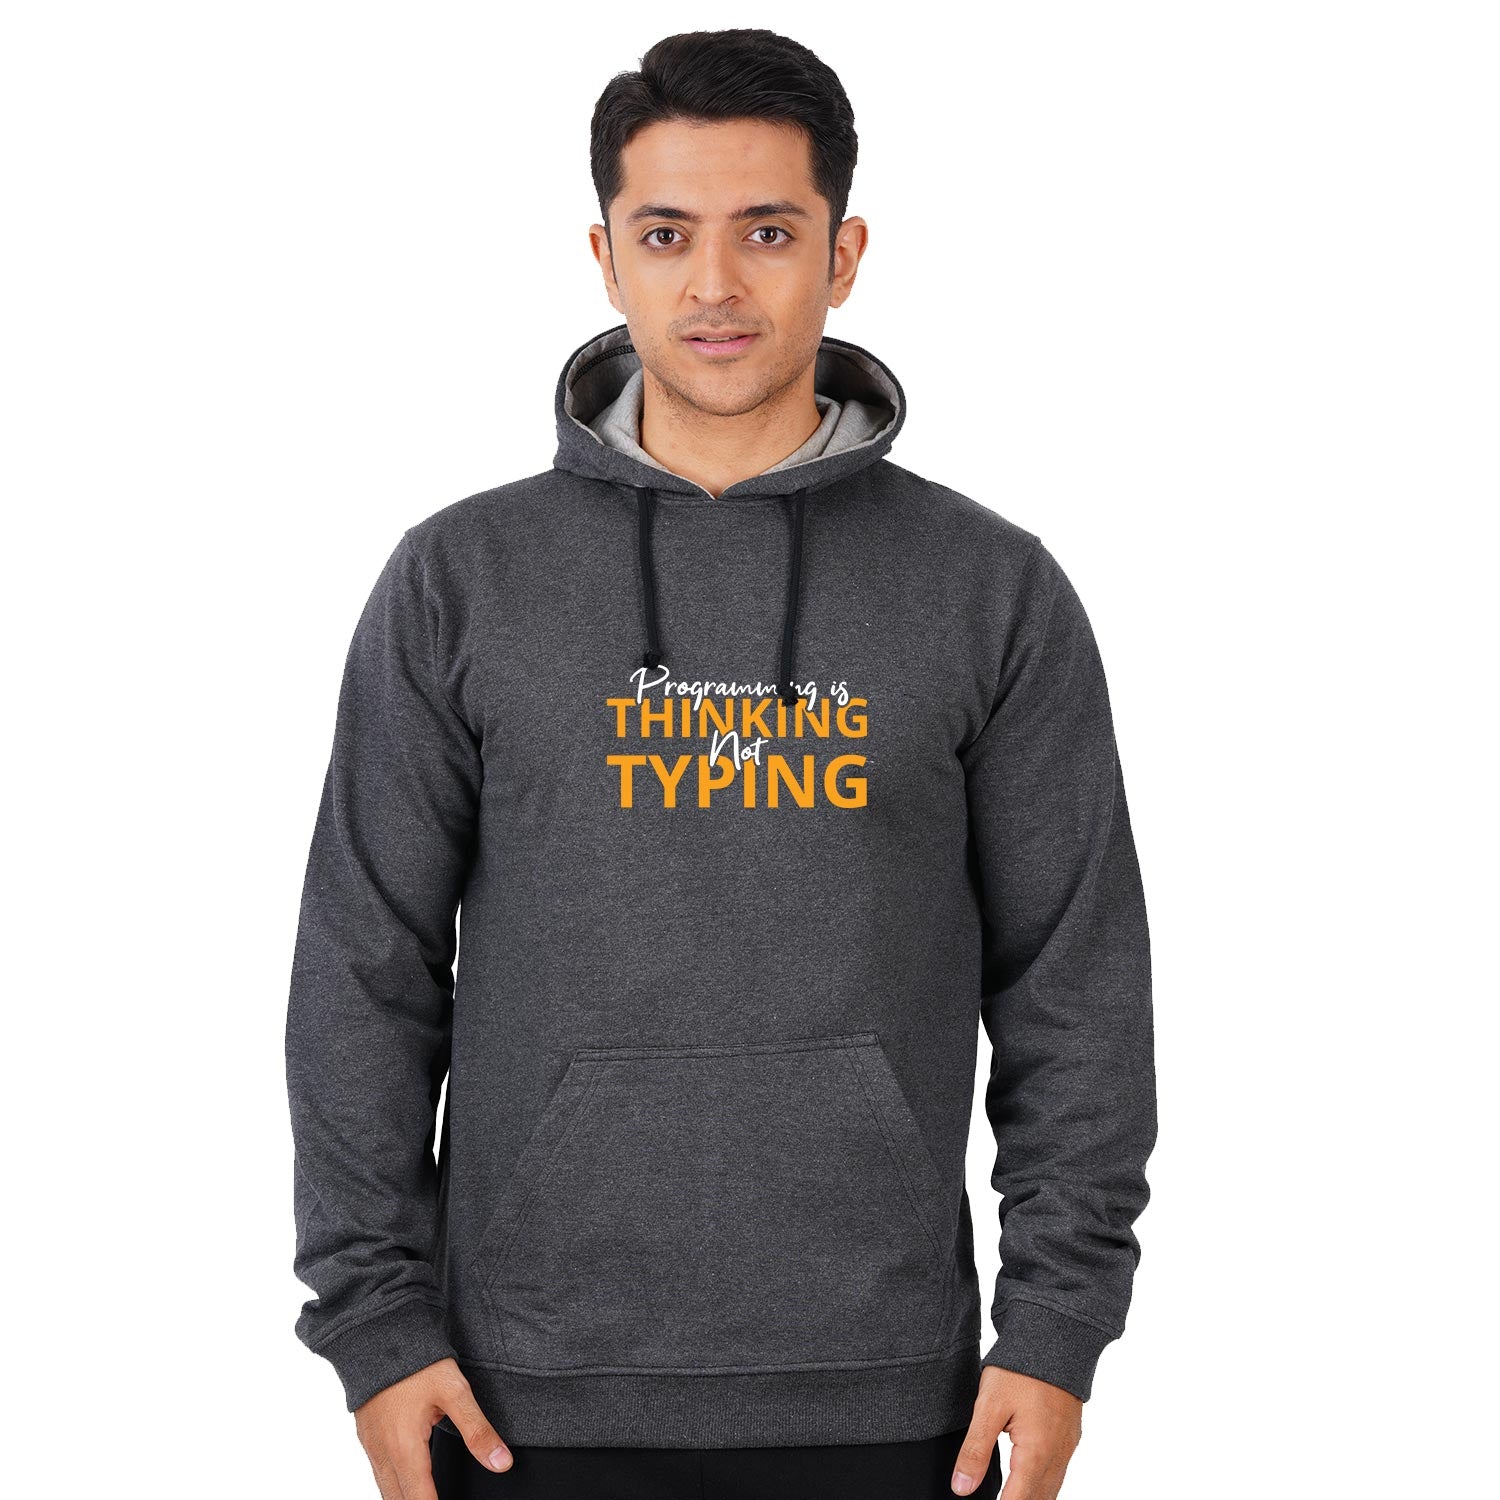 Programming Is Thinking Not Typing Unisex Hoodie